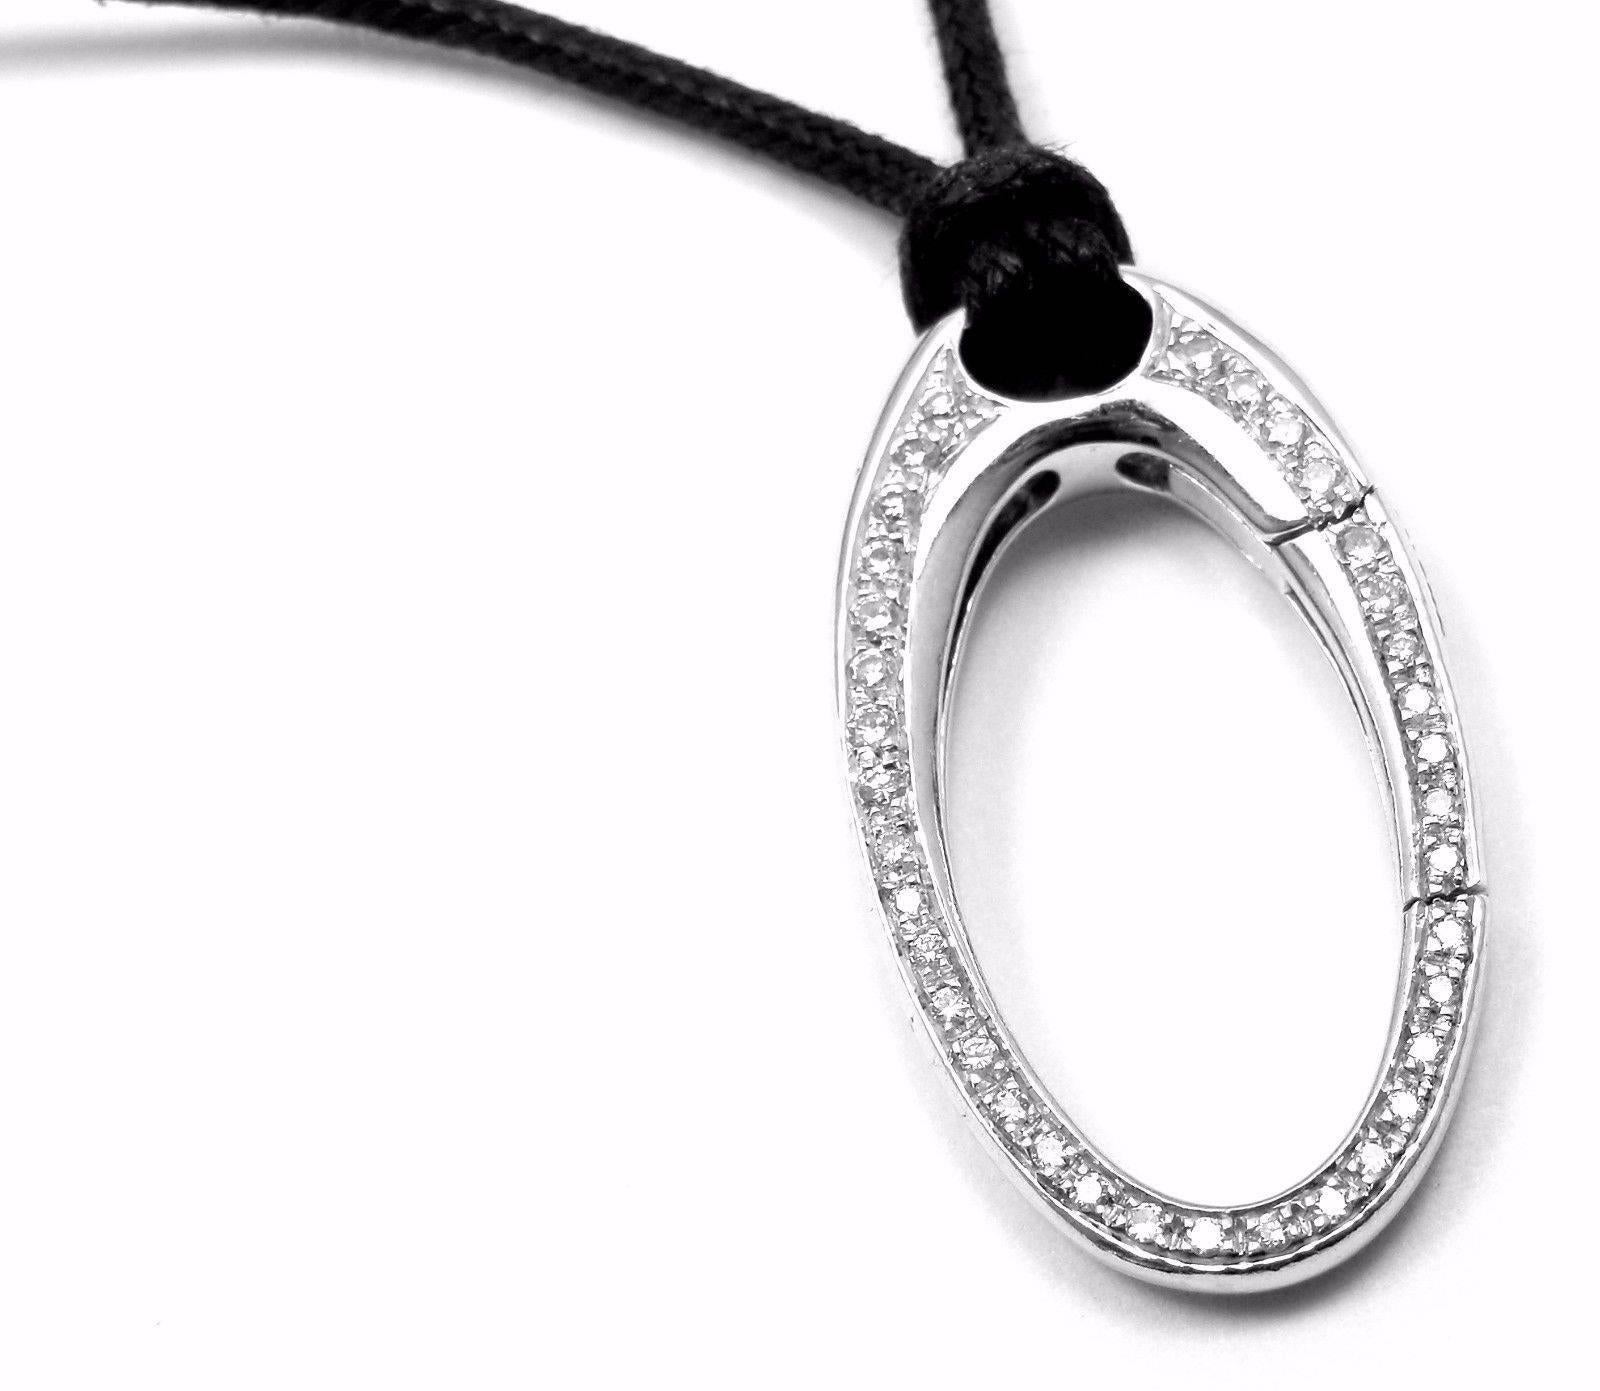 18k White Gold Diamond Oval Pendant Enhancer on A Silk Cord by Aaron Basha. 
With D36 round brilliant cut diamonds VS1 clarity, G color total weight approx. .70ct
Retail Price: $8,800
Details: 
Silk Cord 22